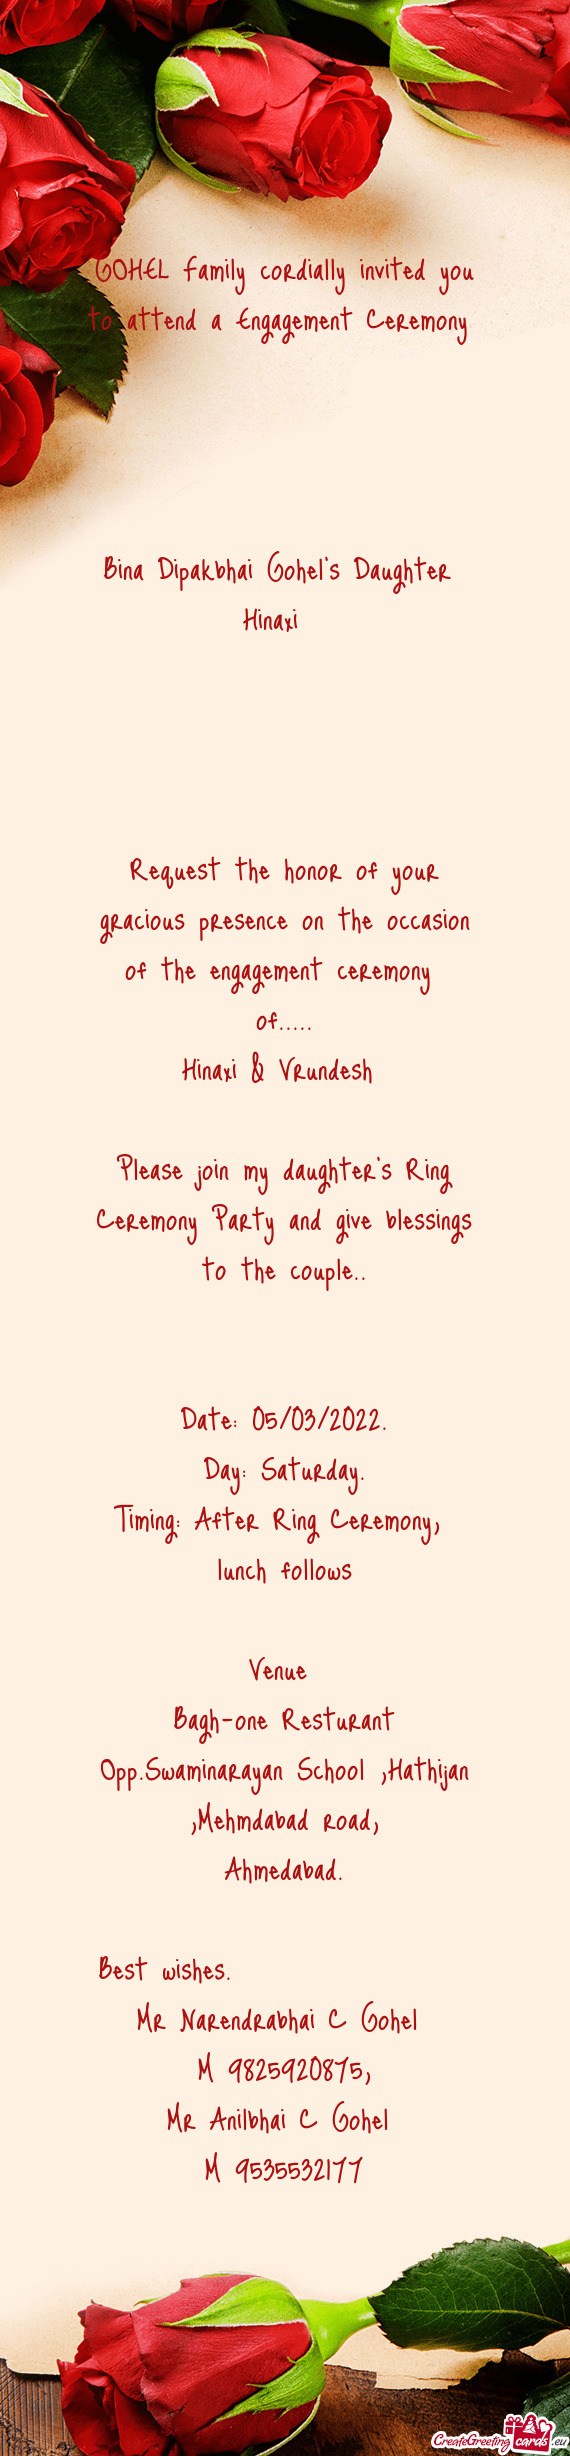 GOHEL Family cordially invited you to attend a Engagement Ceremony